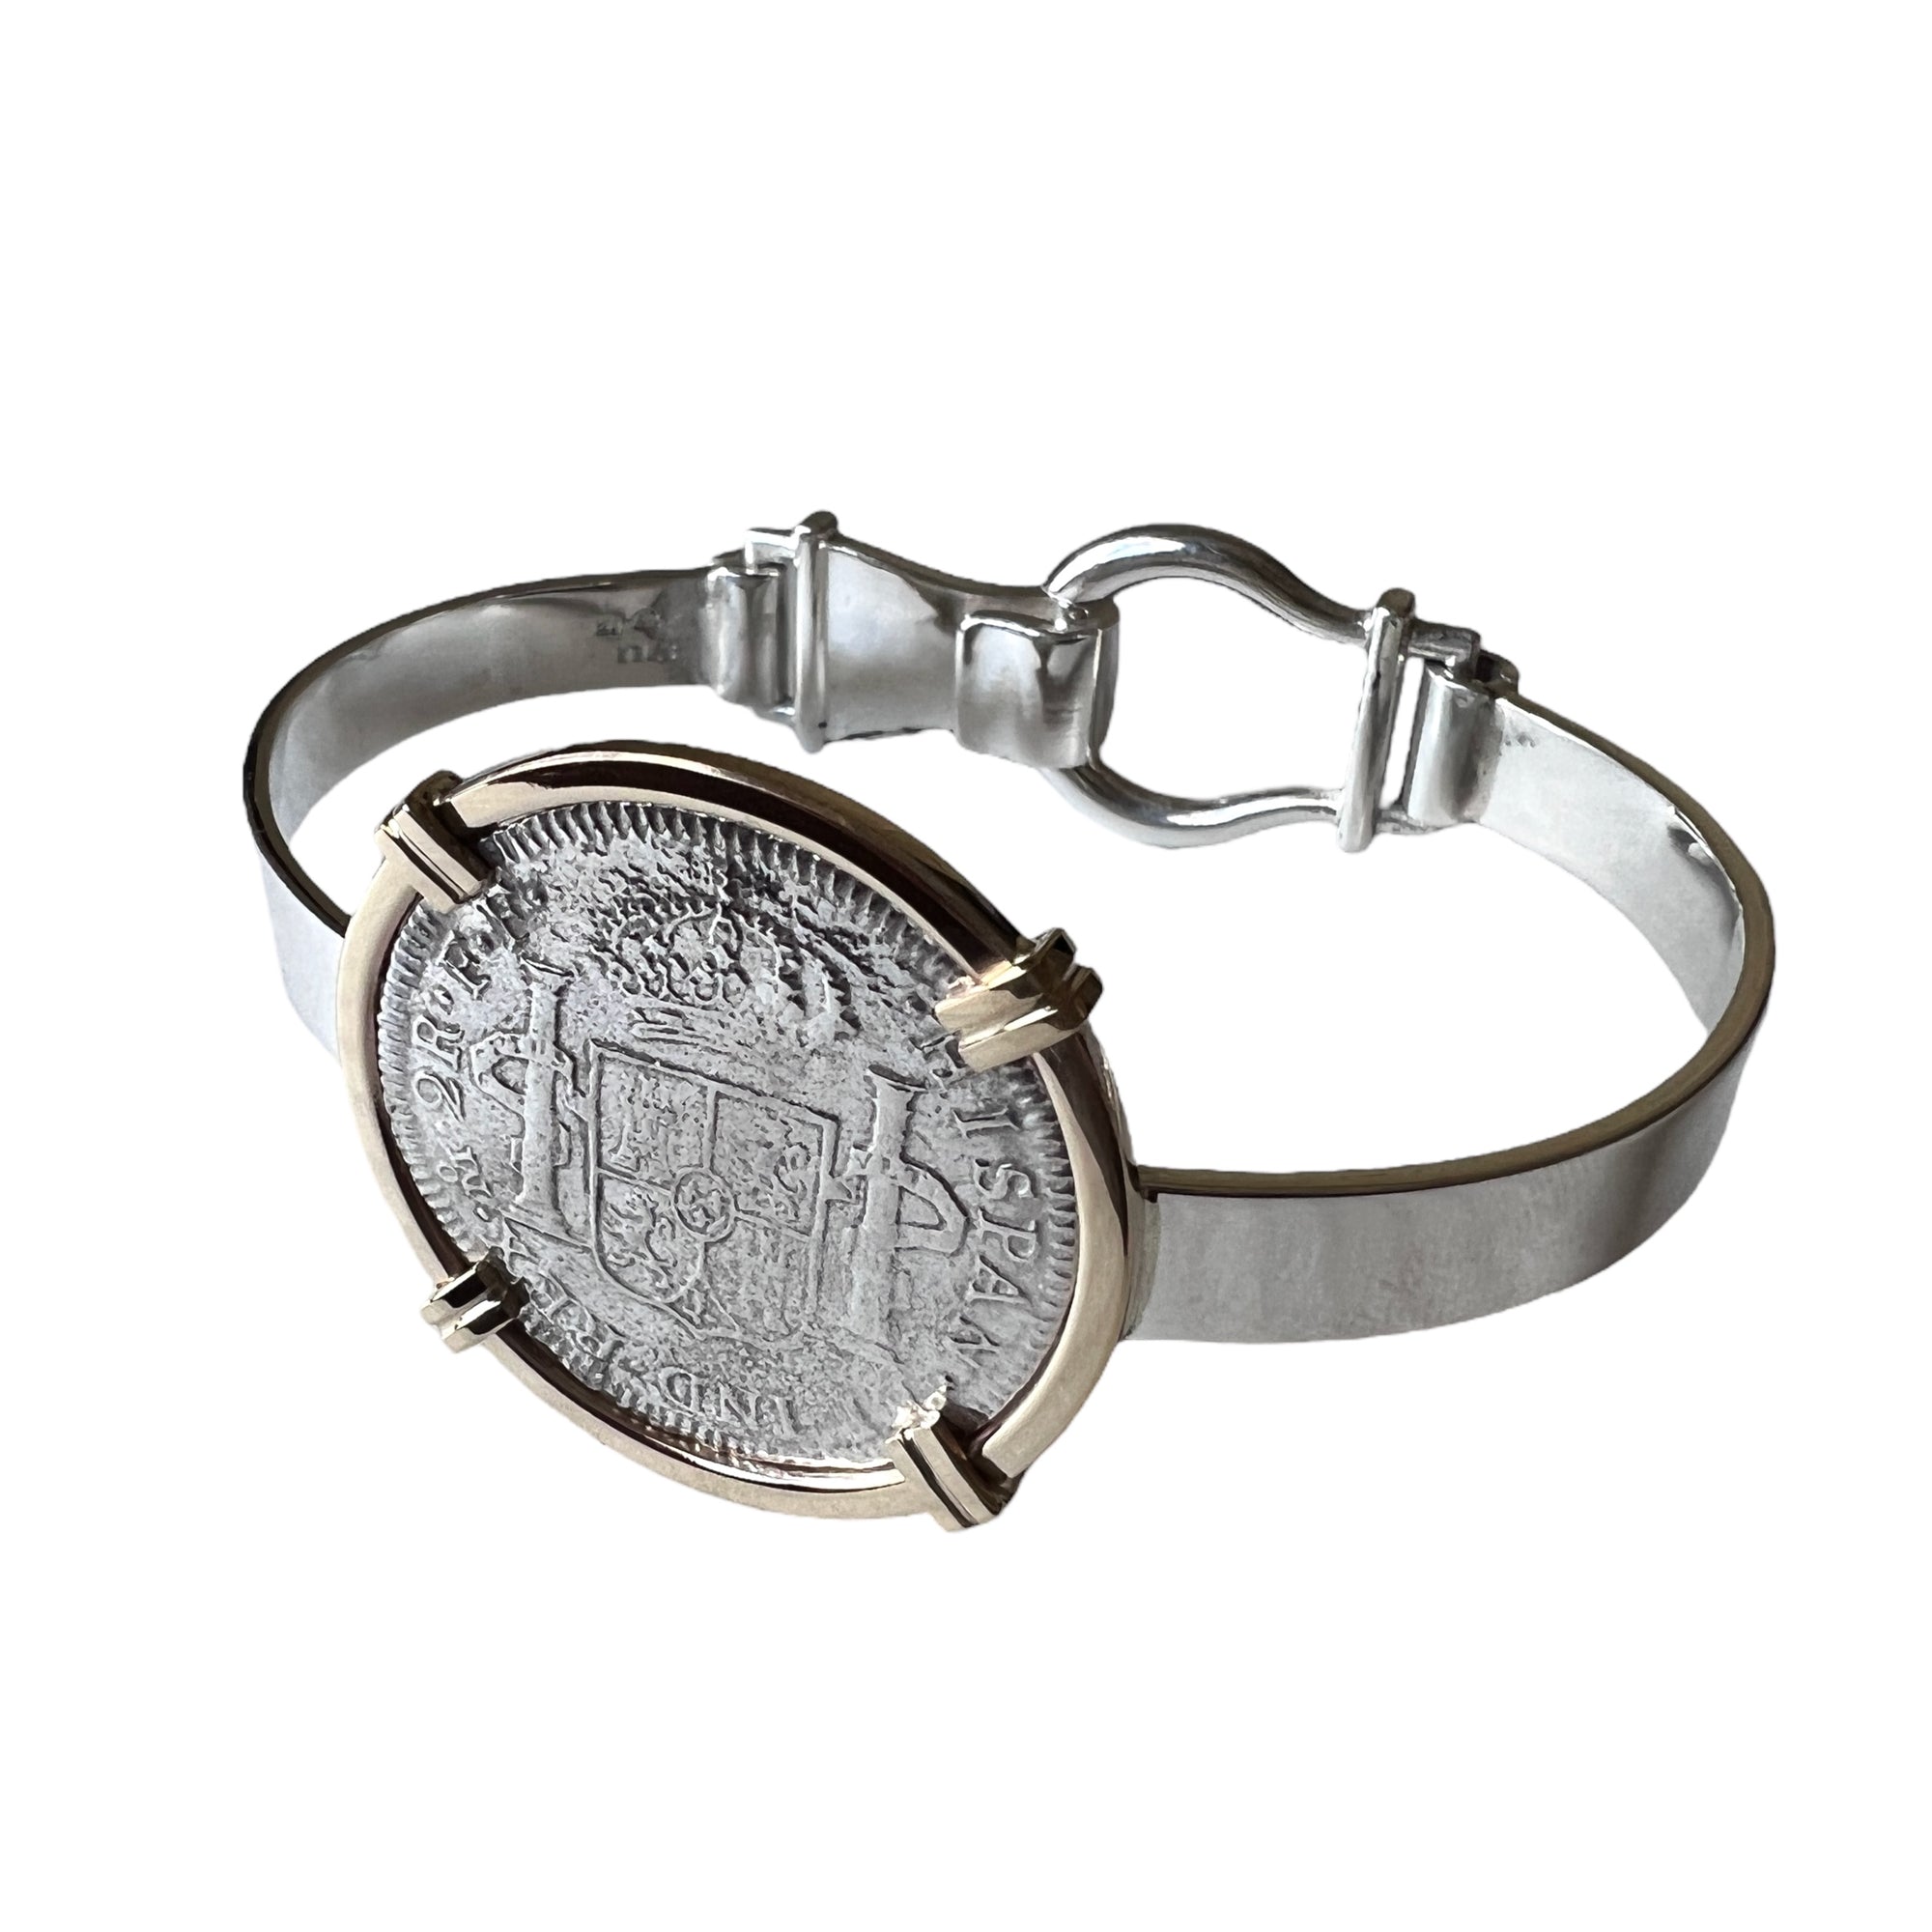 El Cazador Shipwreck - 2 Reales  - Carlos III - Dated 1781 - Grade Fine plus - Presented in a Sterling Silver Bracelet with 14K frame around coin.